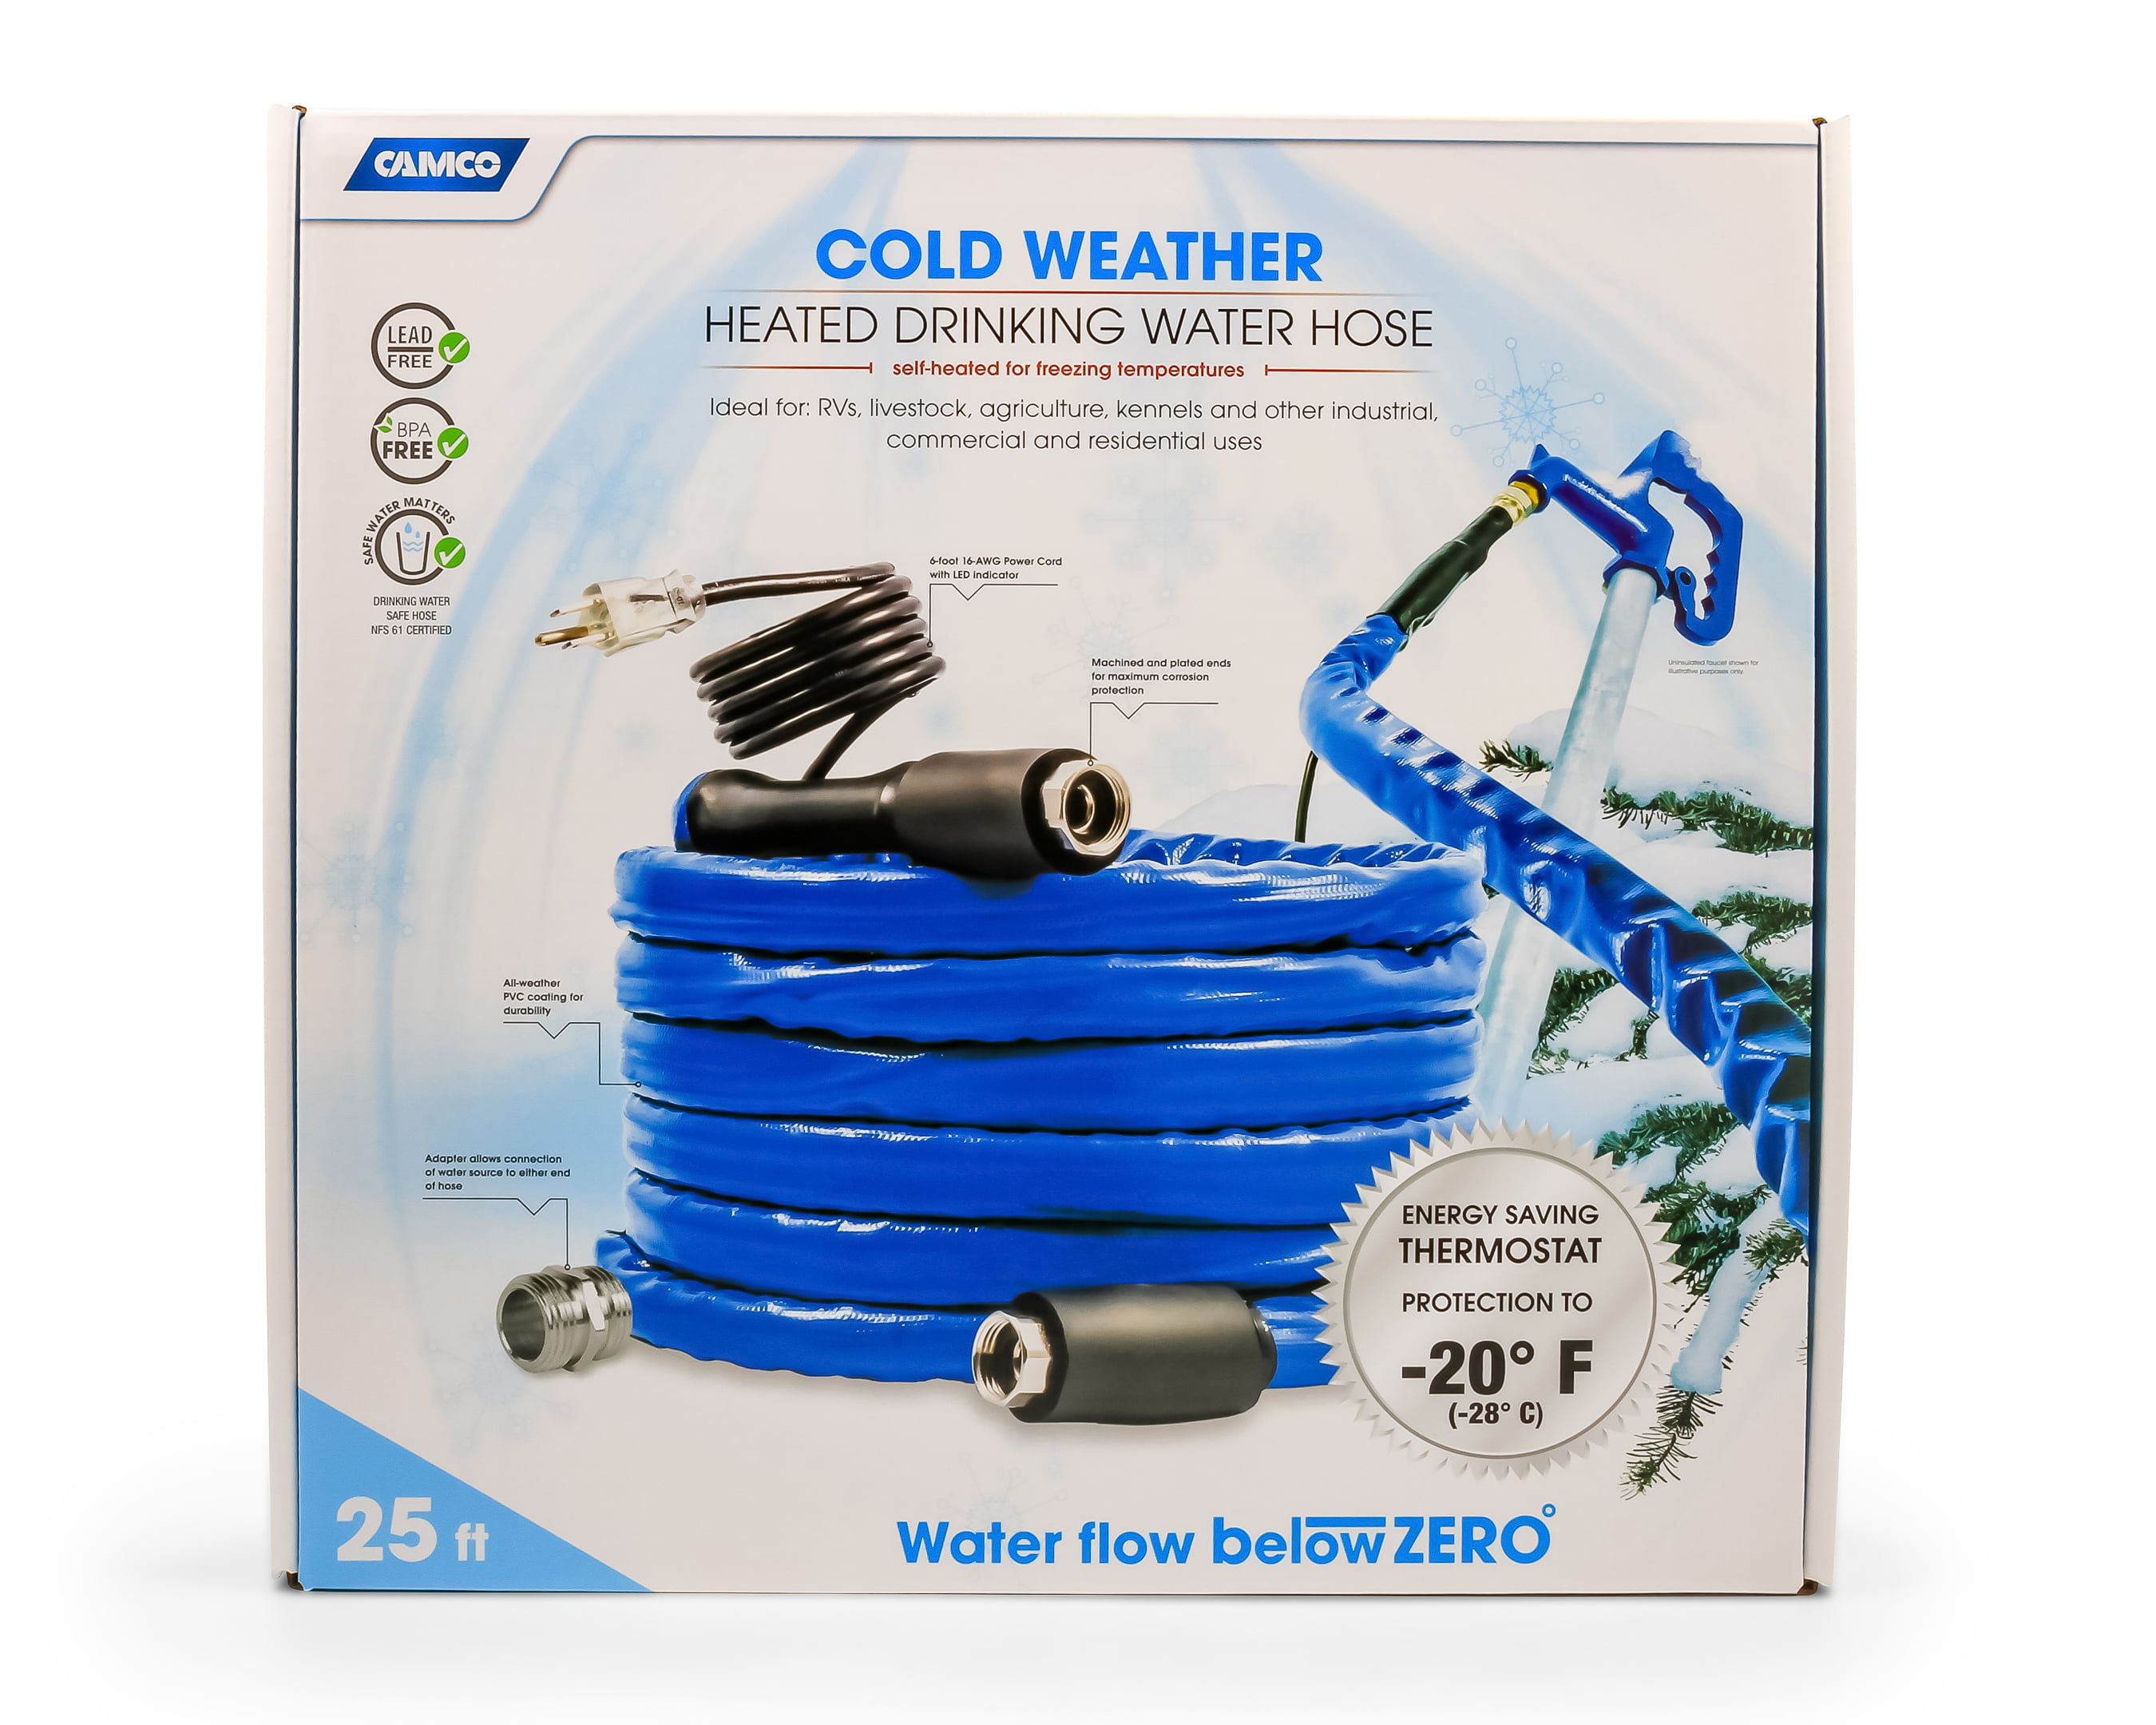 Camco TastePURE 25' Heated Drinking Water Hose, Freeze Protection Down Camco Tastepure Heated Drinking Water Hose Stores